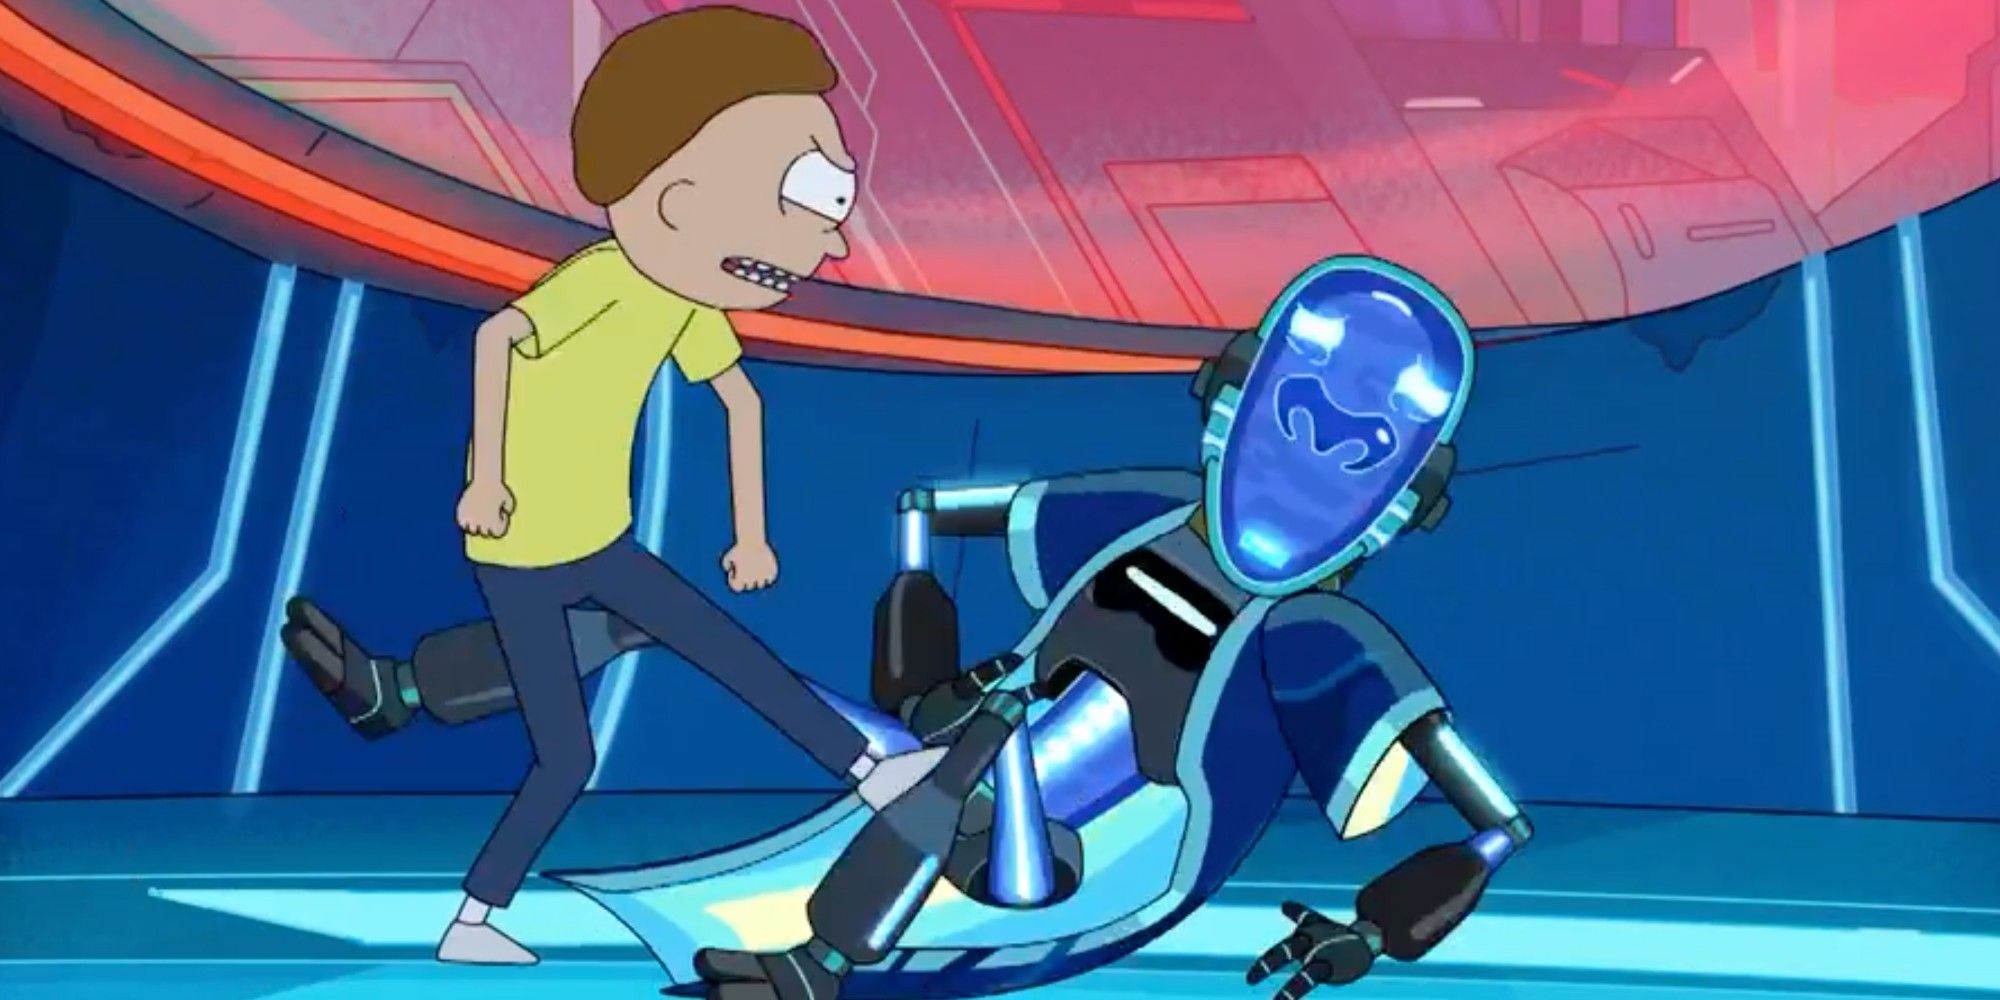 Morty angrily kicks a fallen robot in Rick &amp; Morty